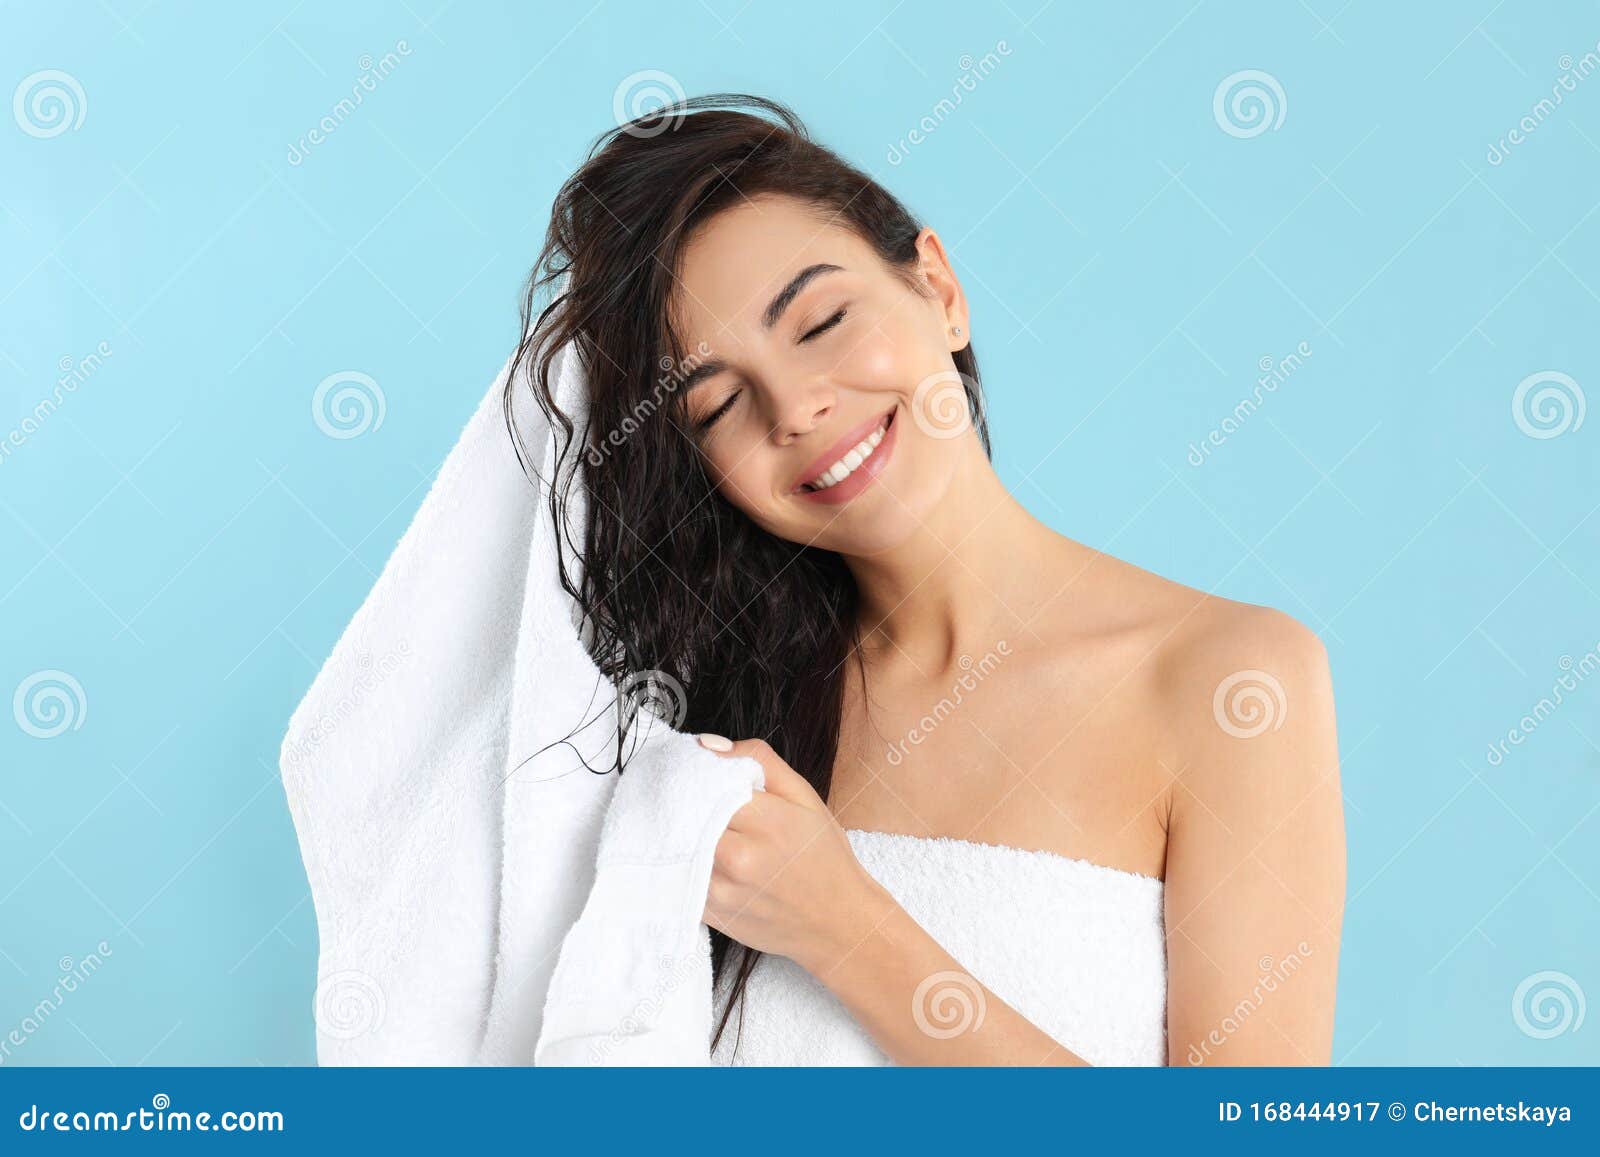 young woman drying hair with towel on blue background